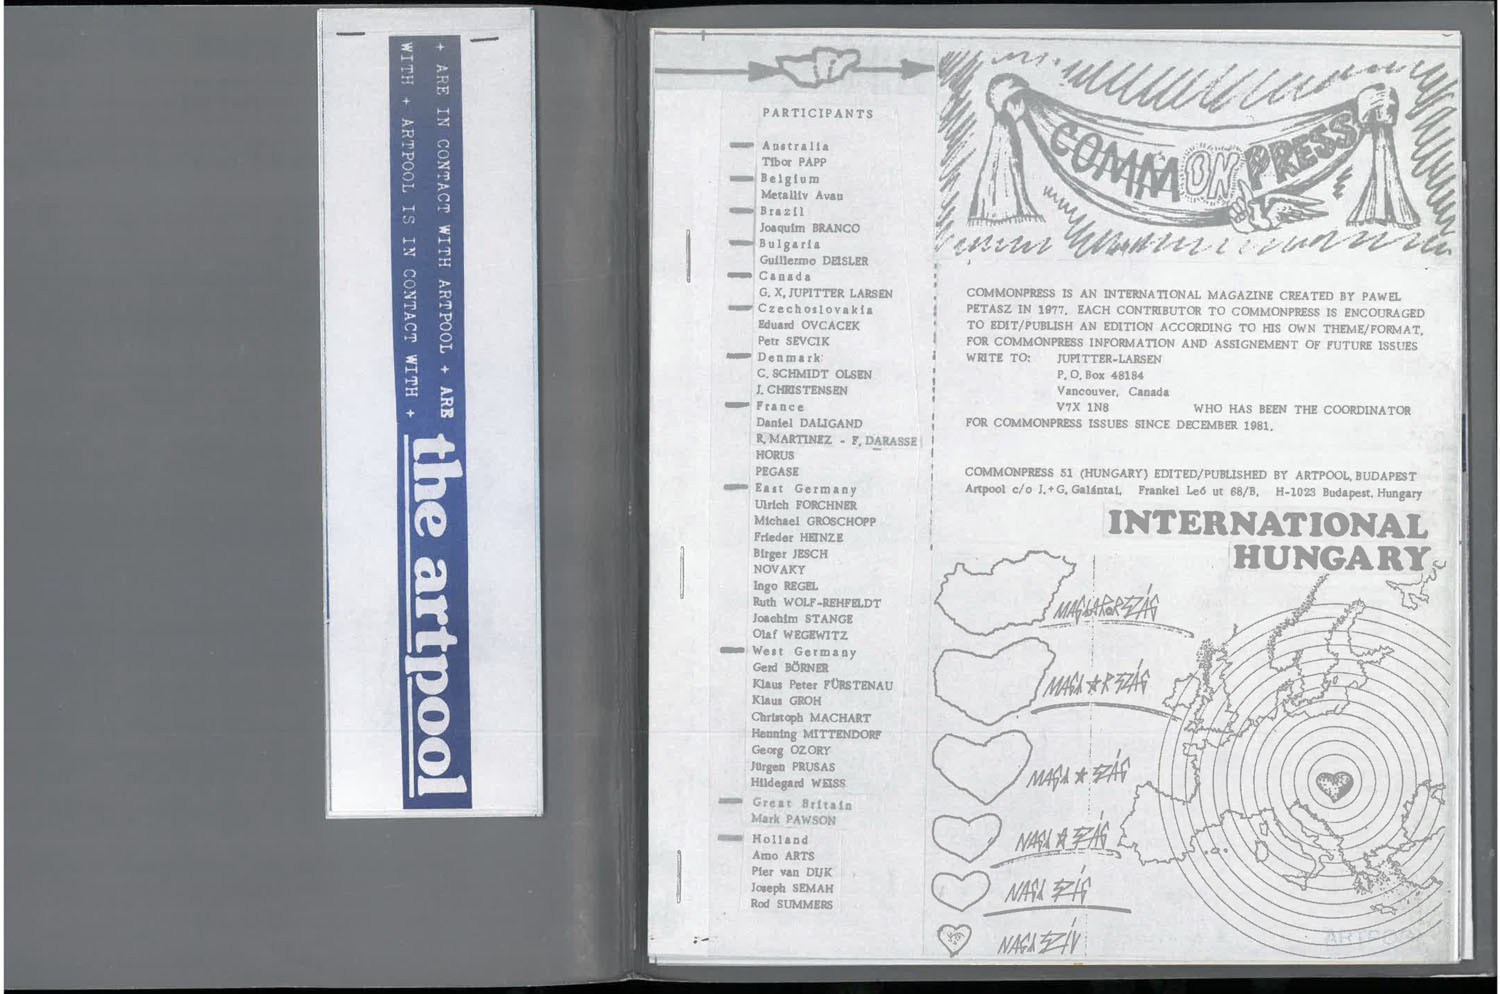 First page  of Commonpress 51 (Hungary issue), Artpool, 1984–1989 with the list of participants